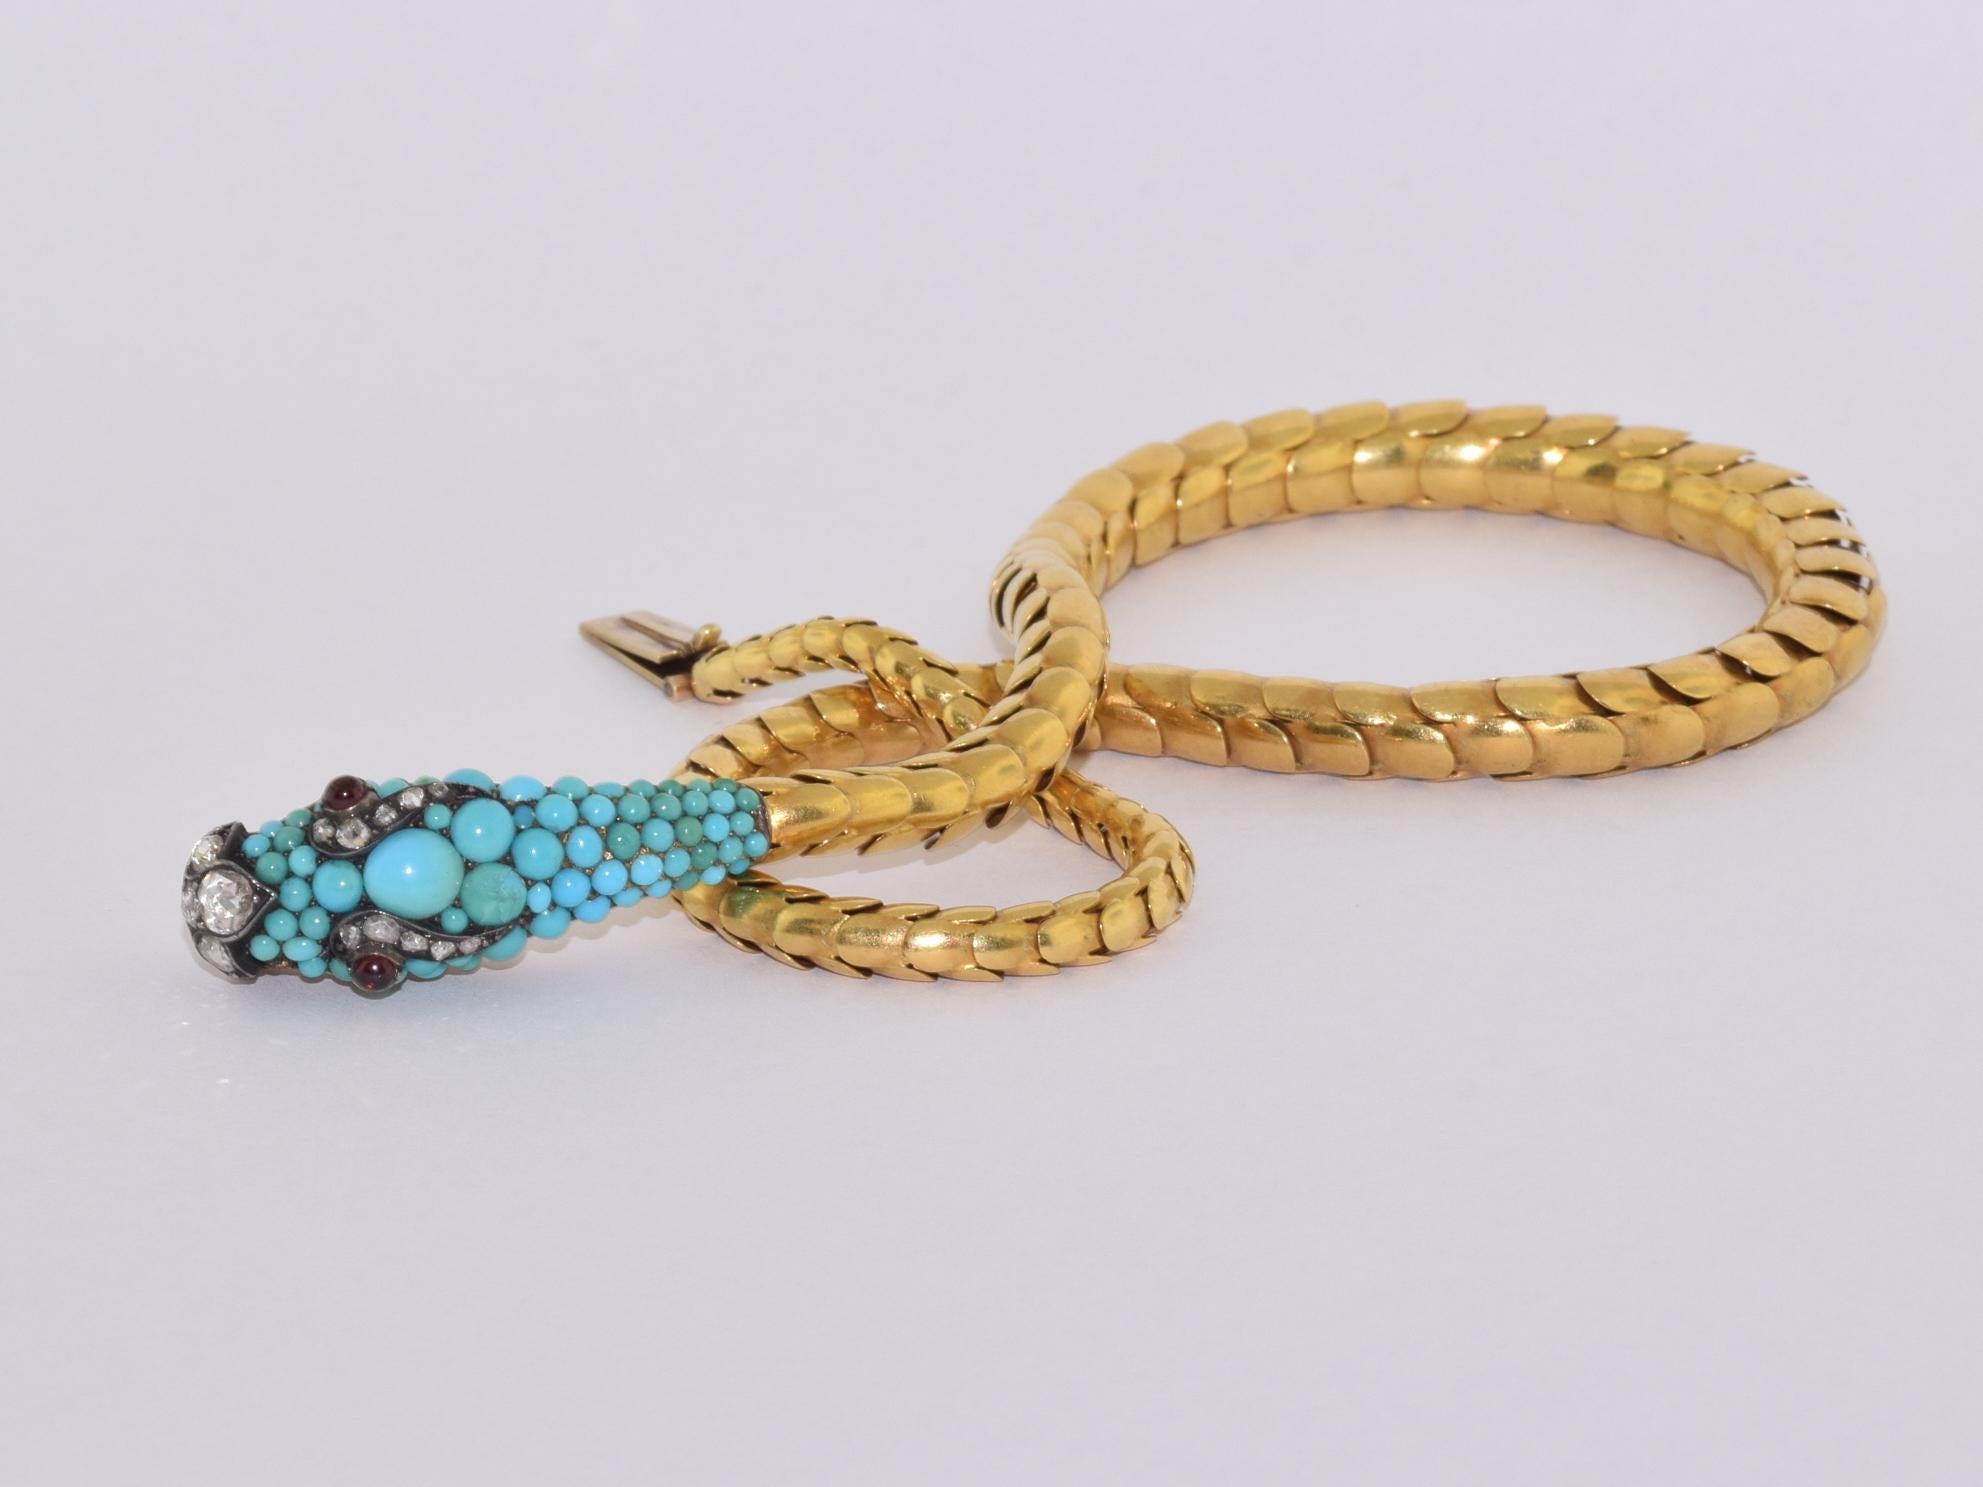 Rose Cut Convertible Antique Yellow Gold and Turquoise Snake Necklace, circa 1870s